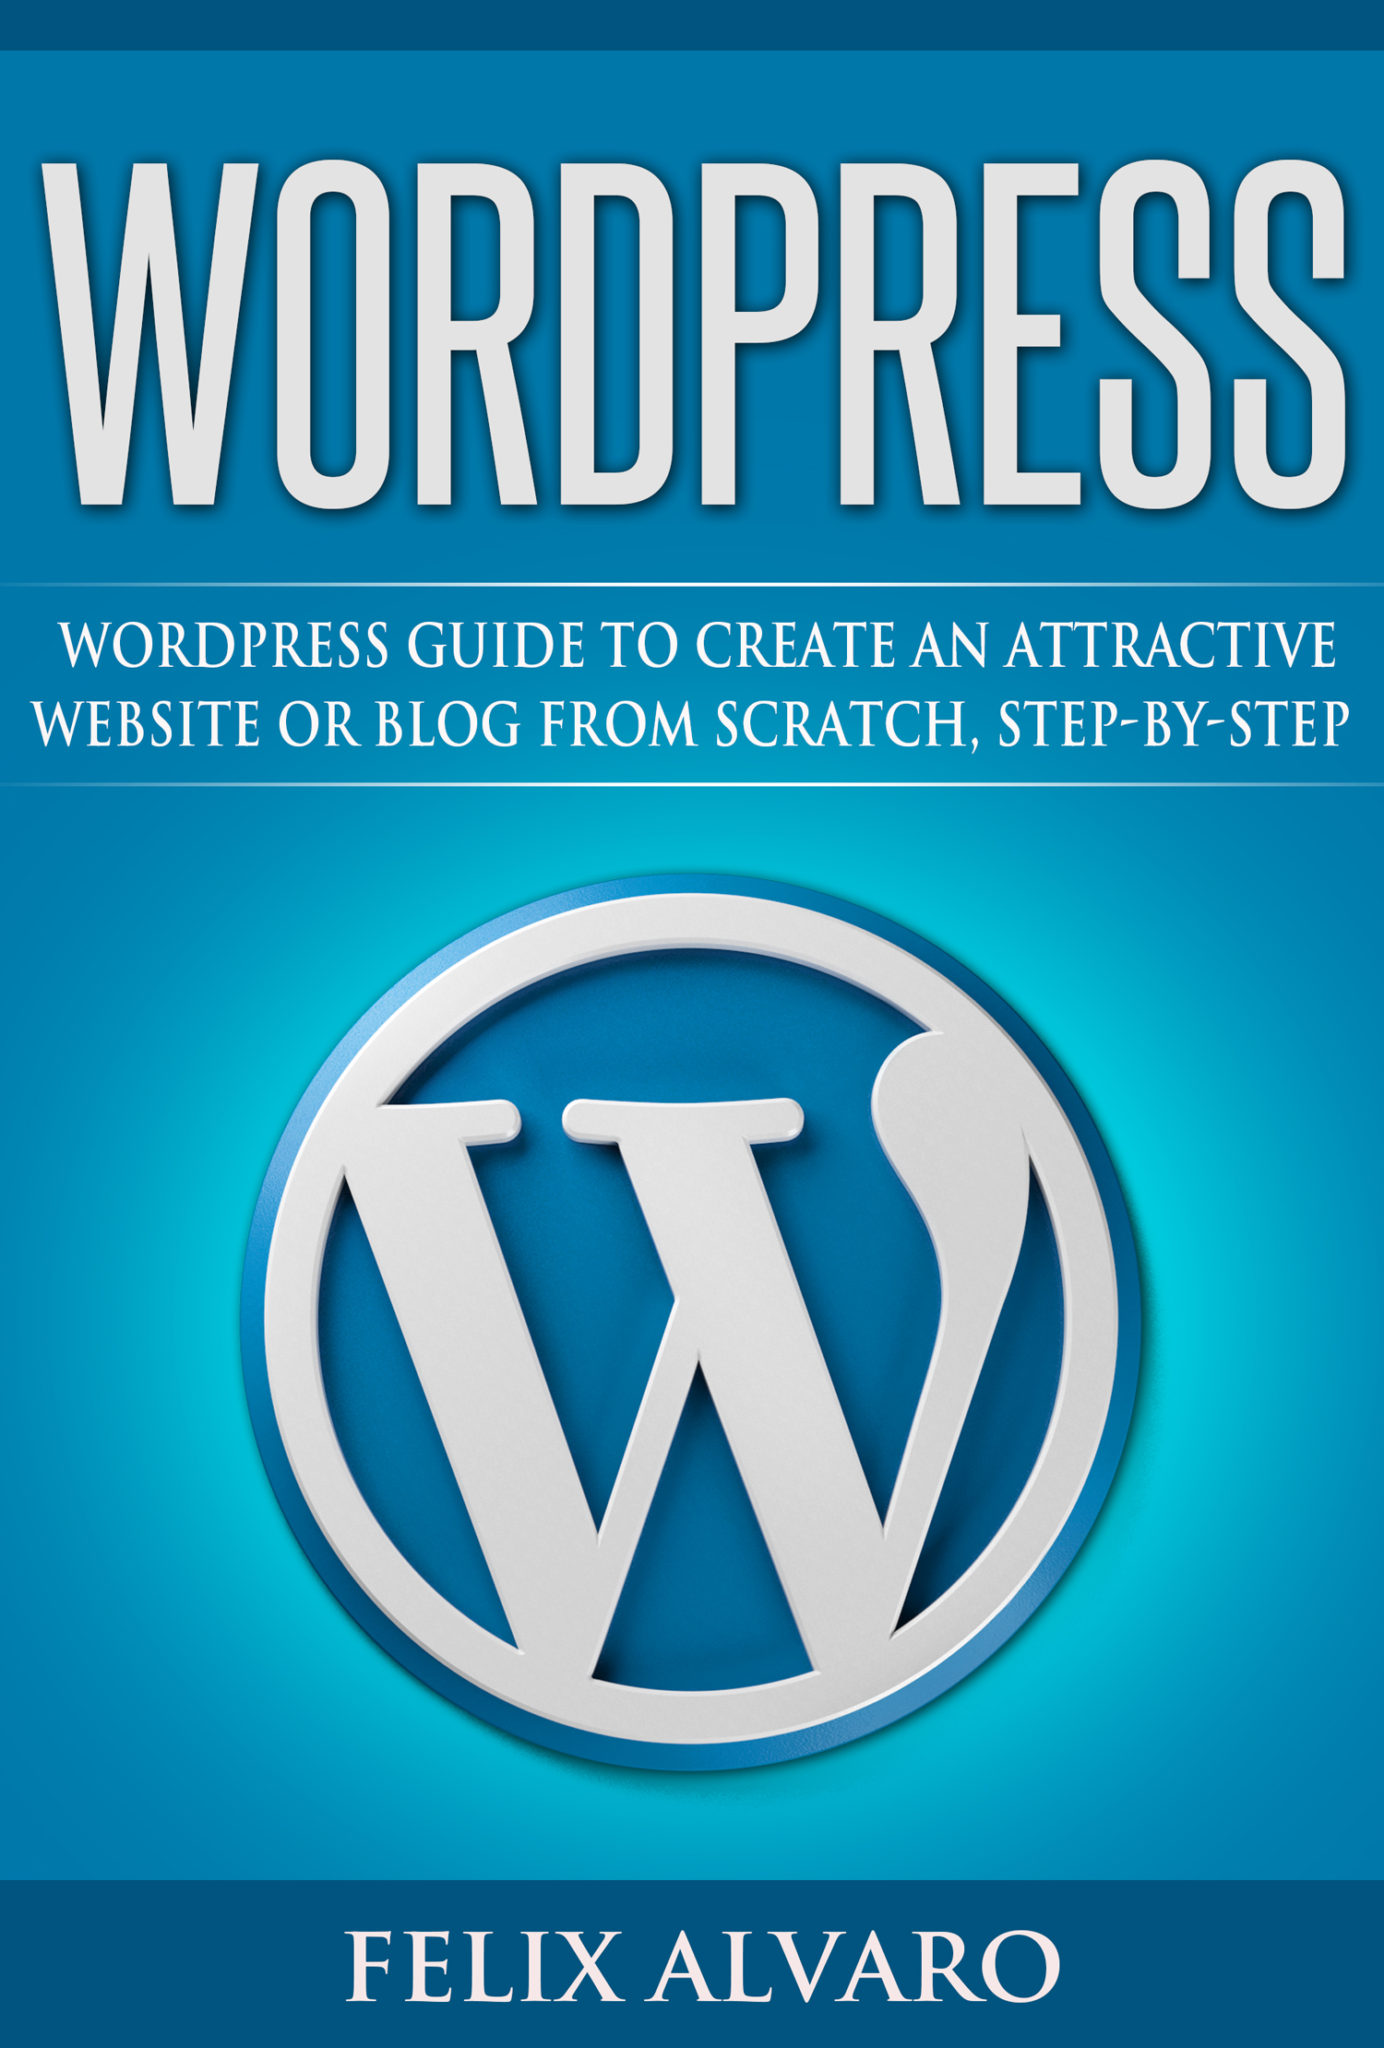 FREE: WORDPRESS: Simple WordPress Guide to Create an Attractive Website or Blog from Scratch, Step-by-step by Felix Alvaro